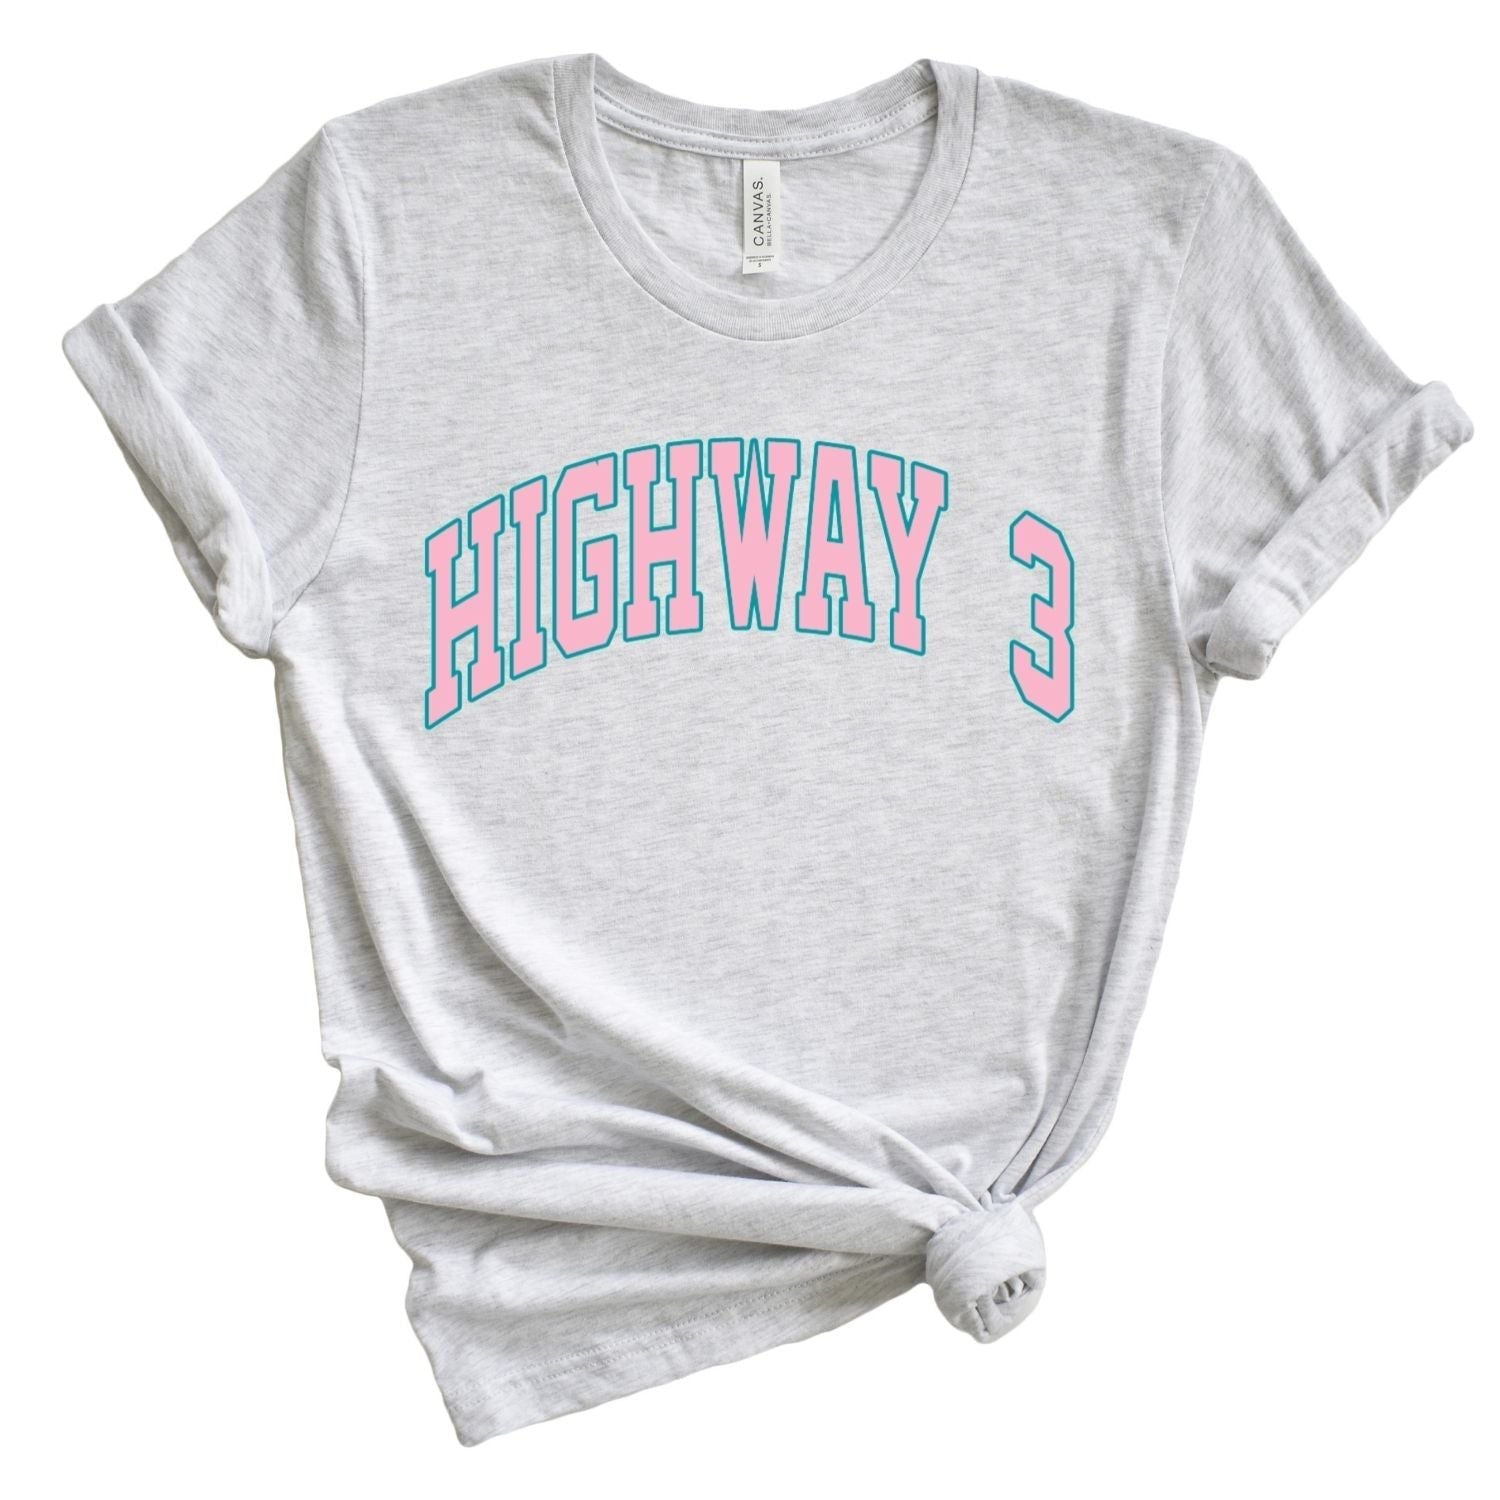 Highway 3 Graphic Tee (Adult) - Ash/Pink-Teal